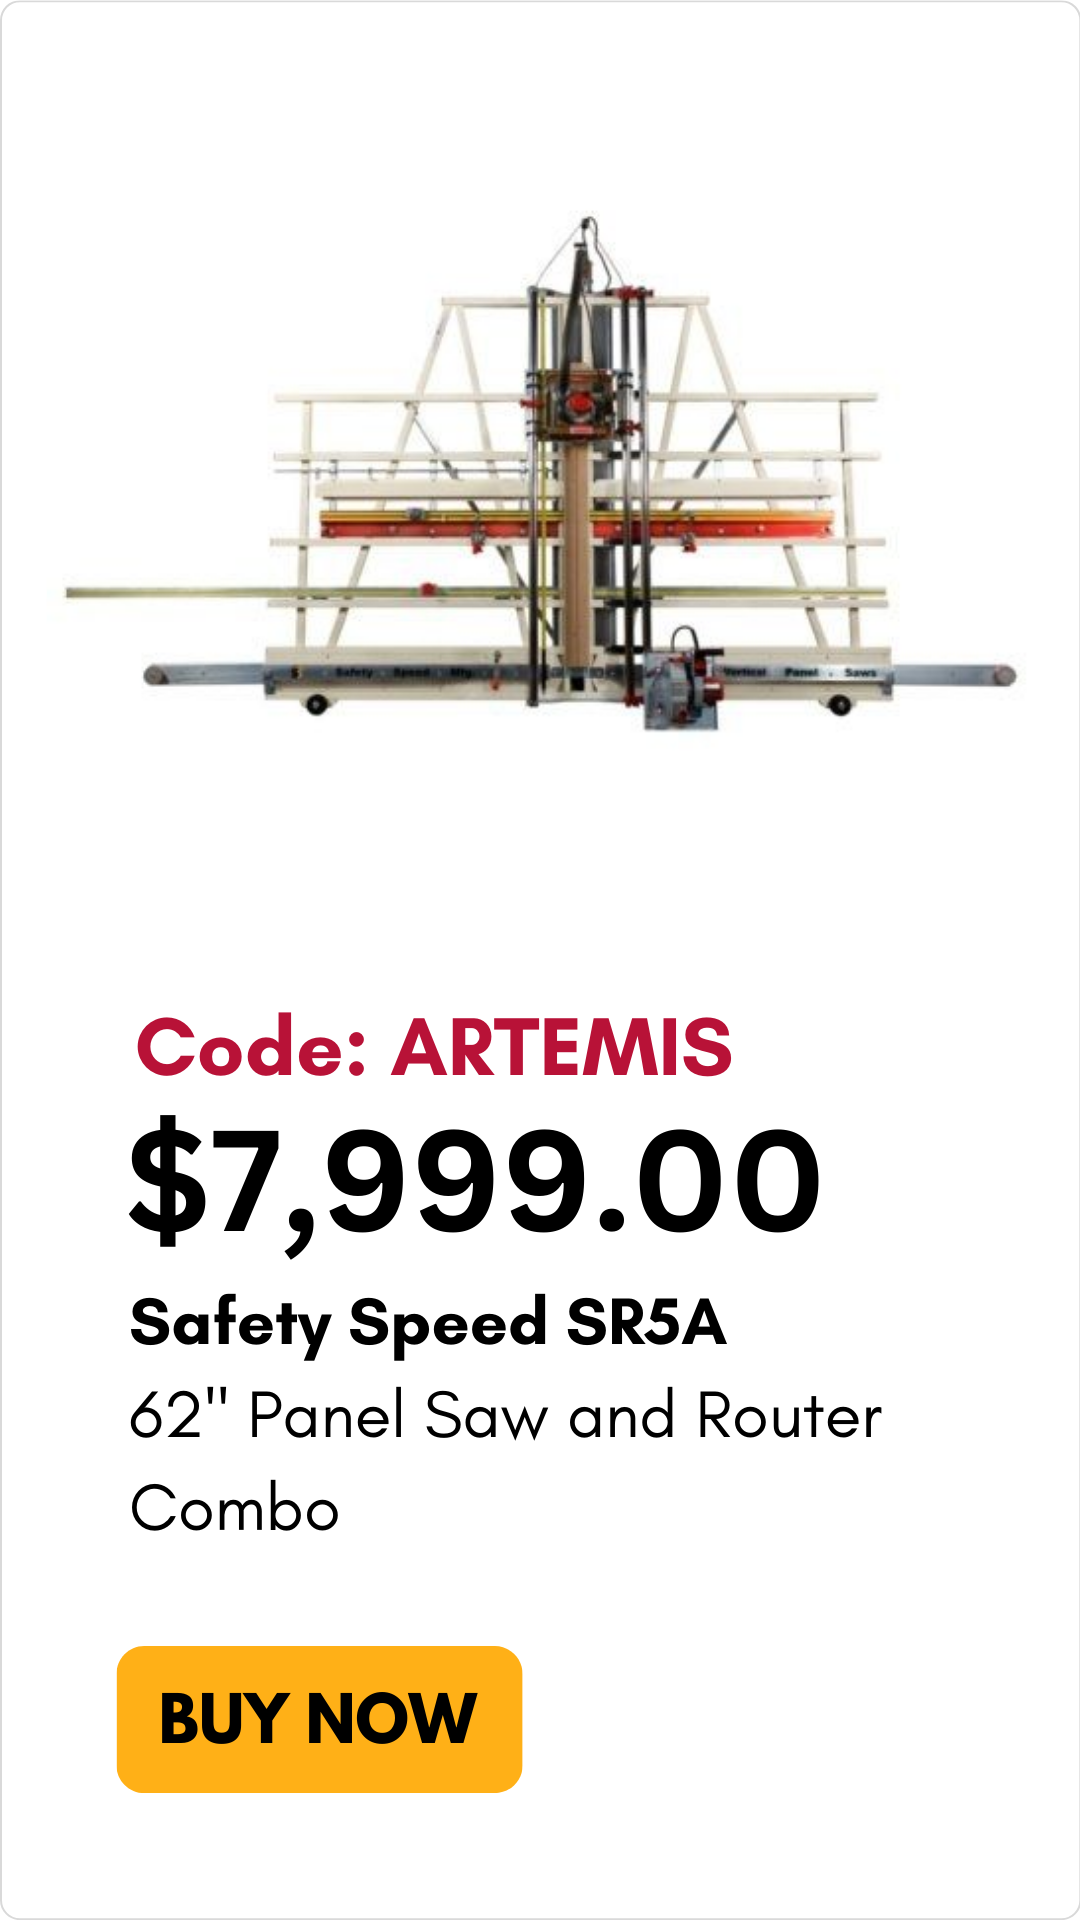 Safety Speed SR5A ACM 62" Panel Saw and Router Combo with code ARTEMIS